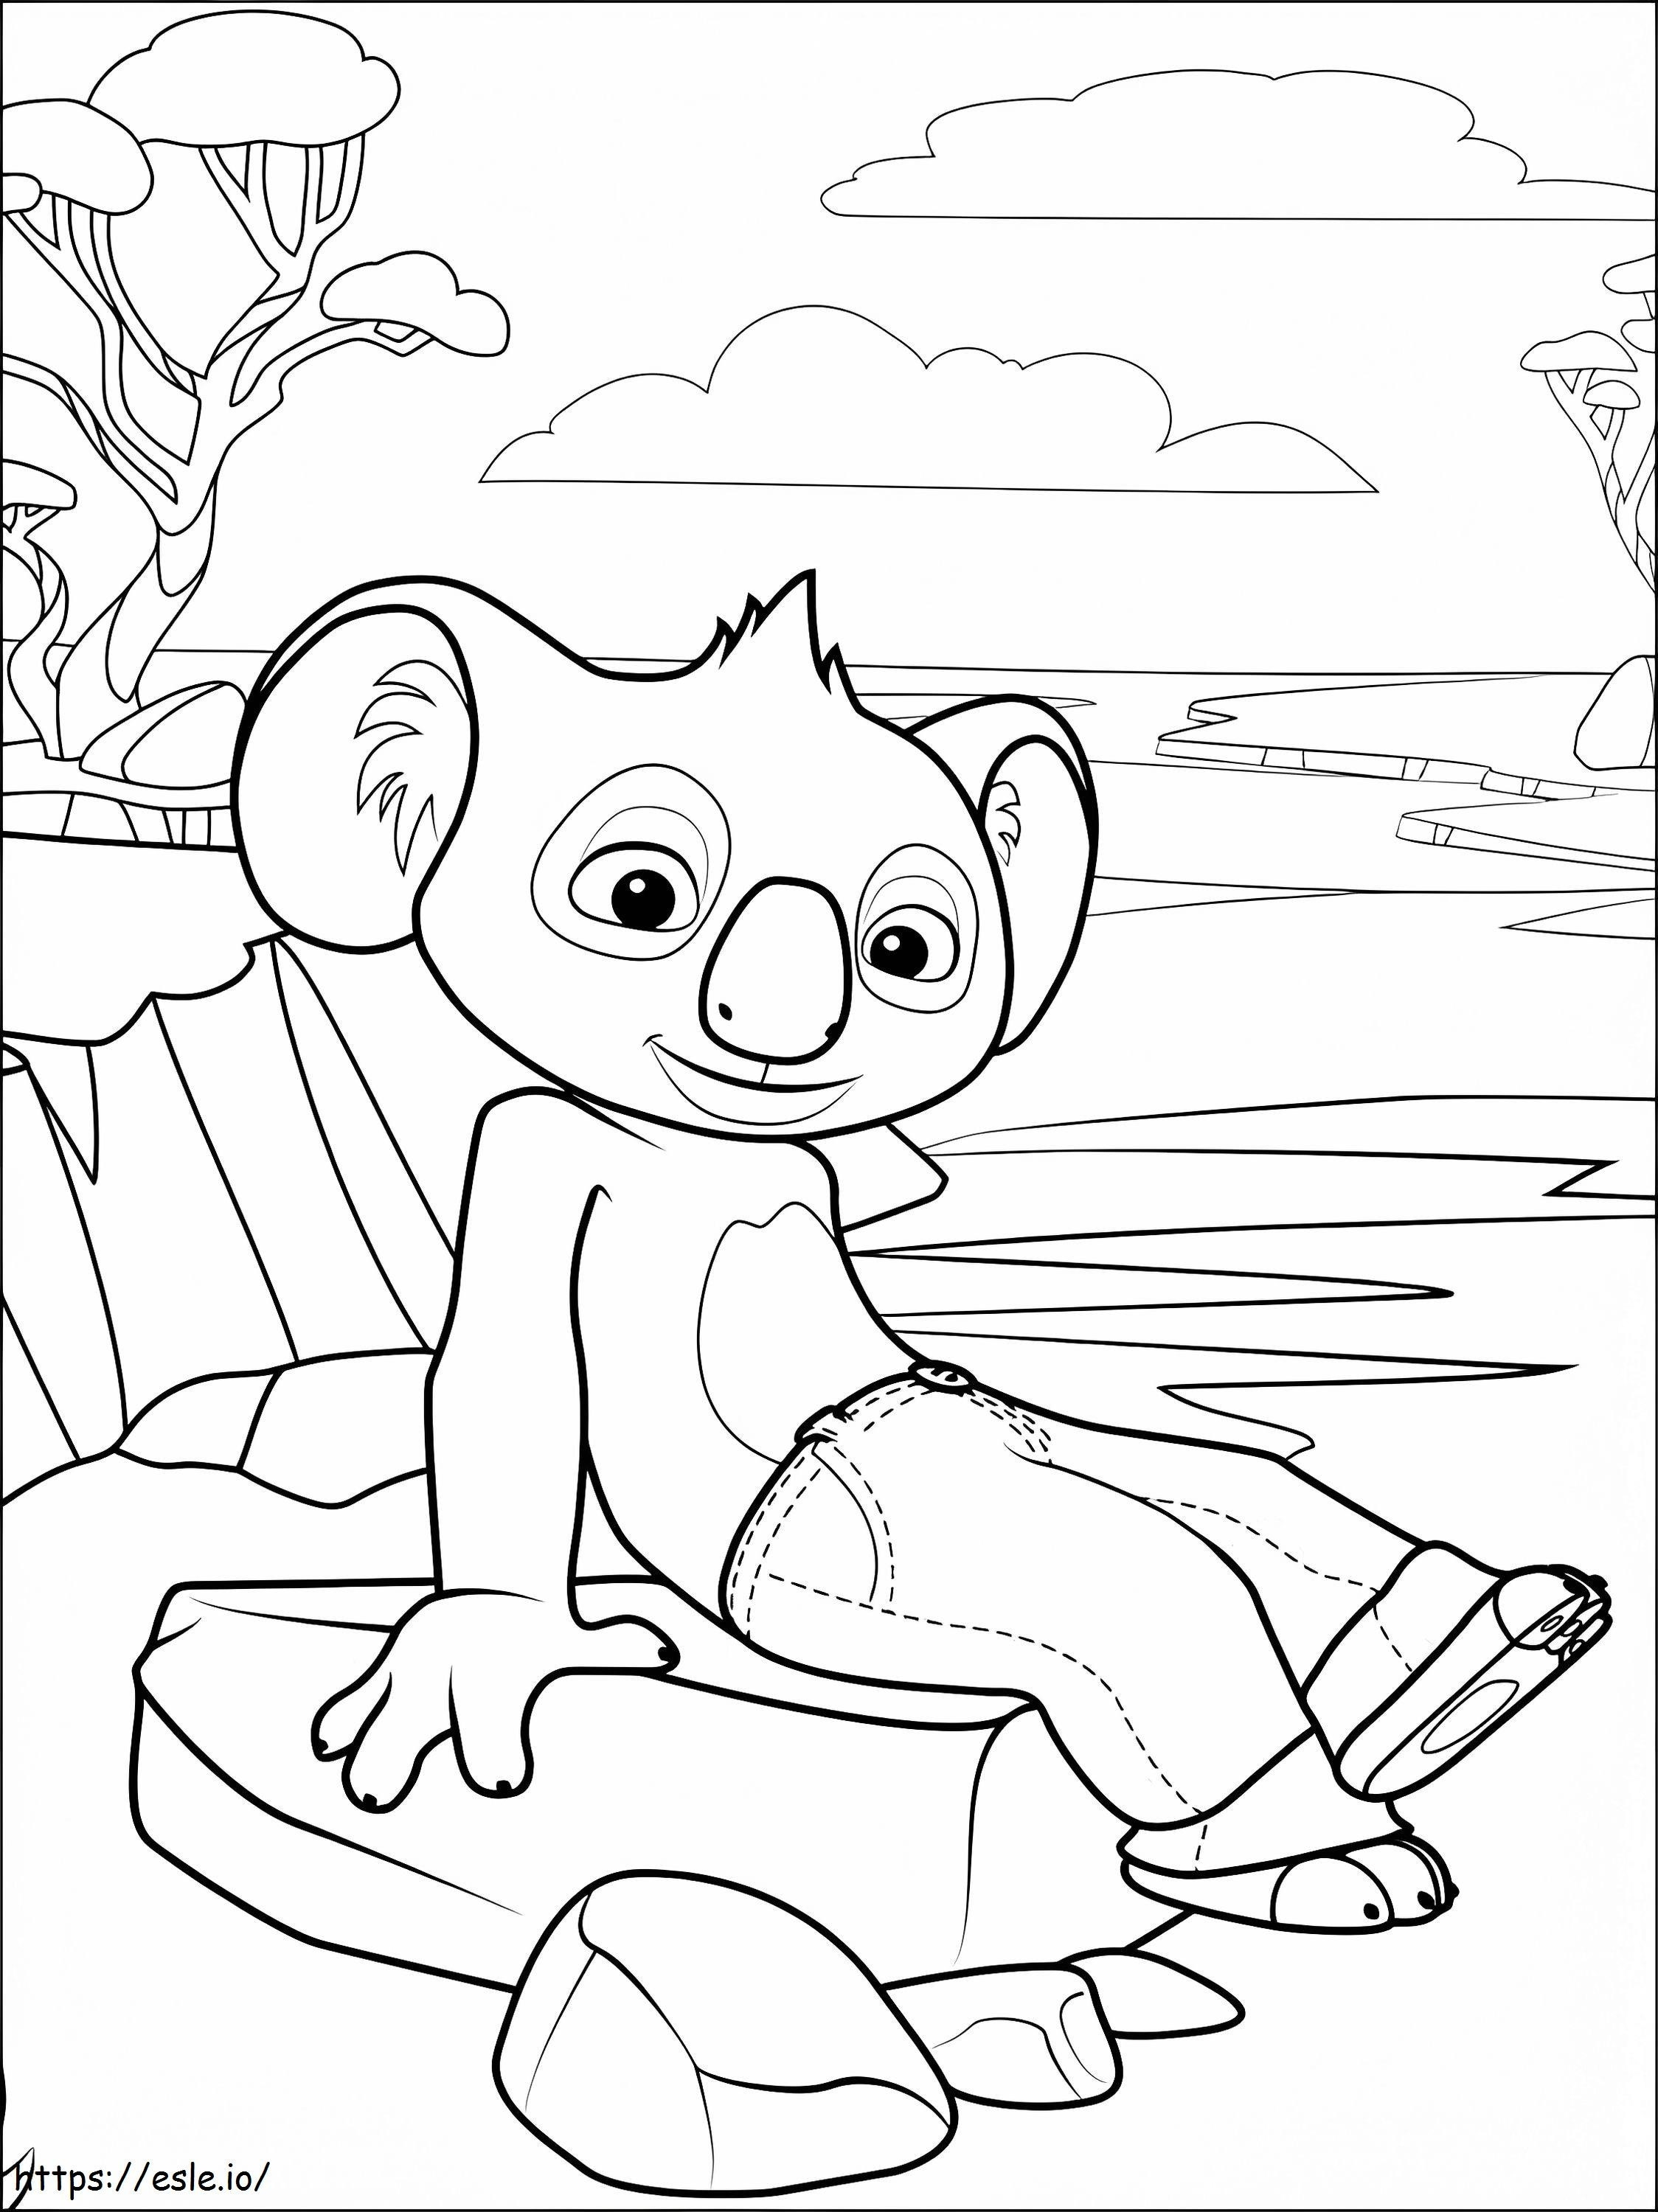 Blinky Bill 3 coloring page